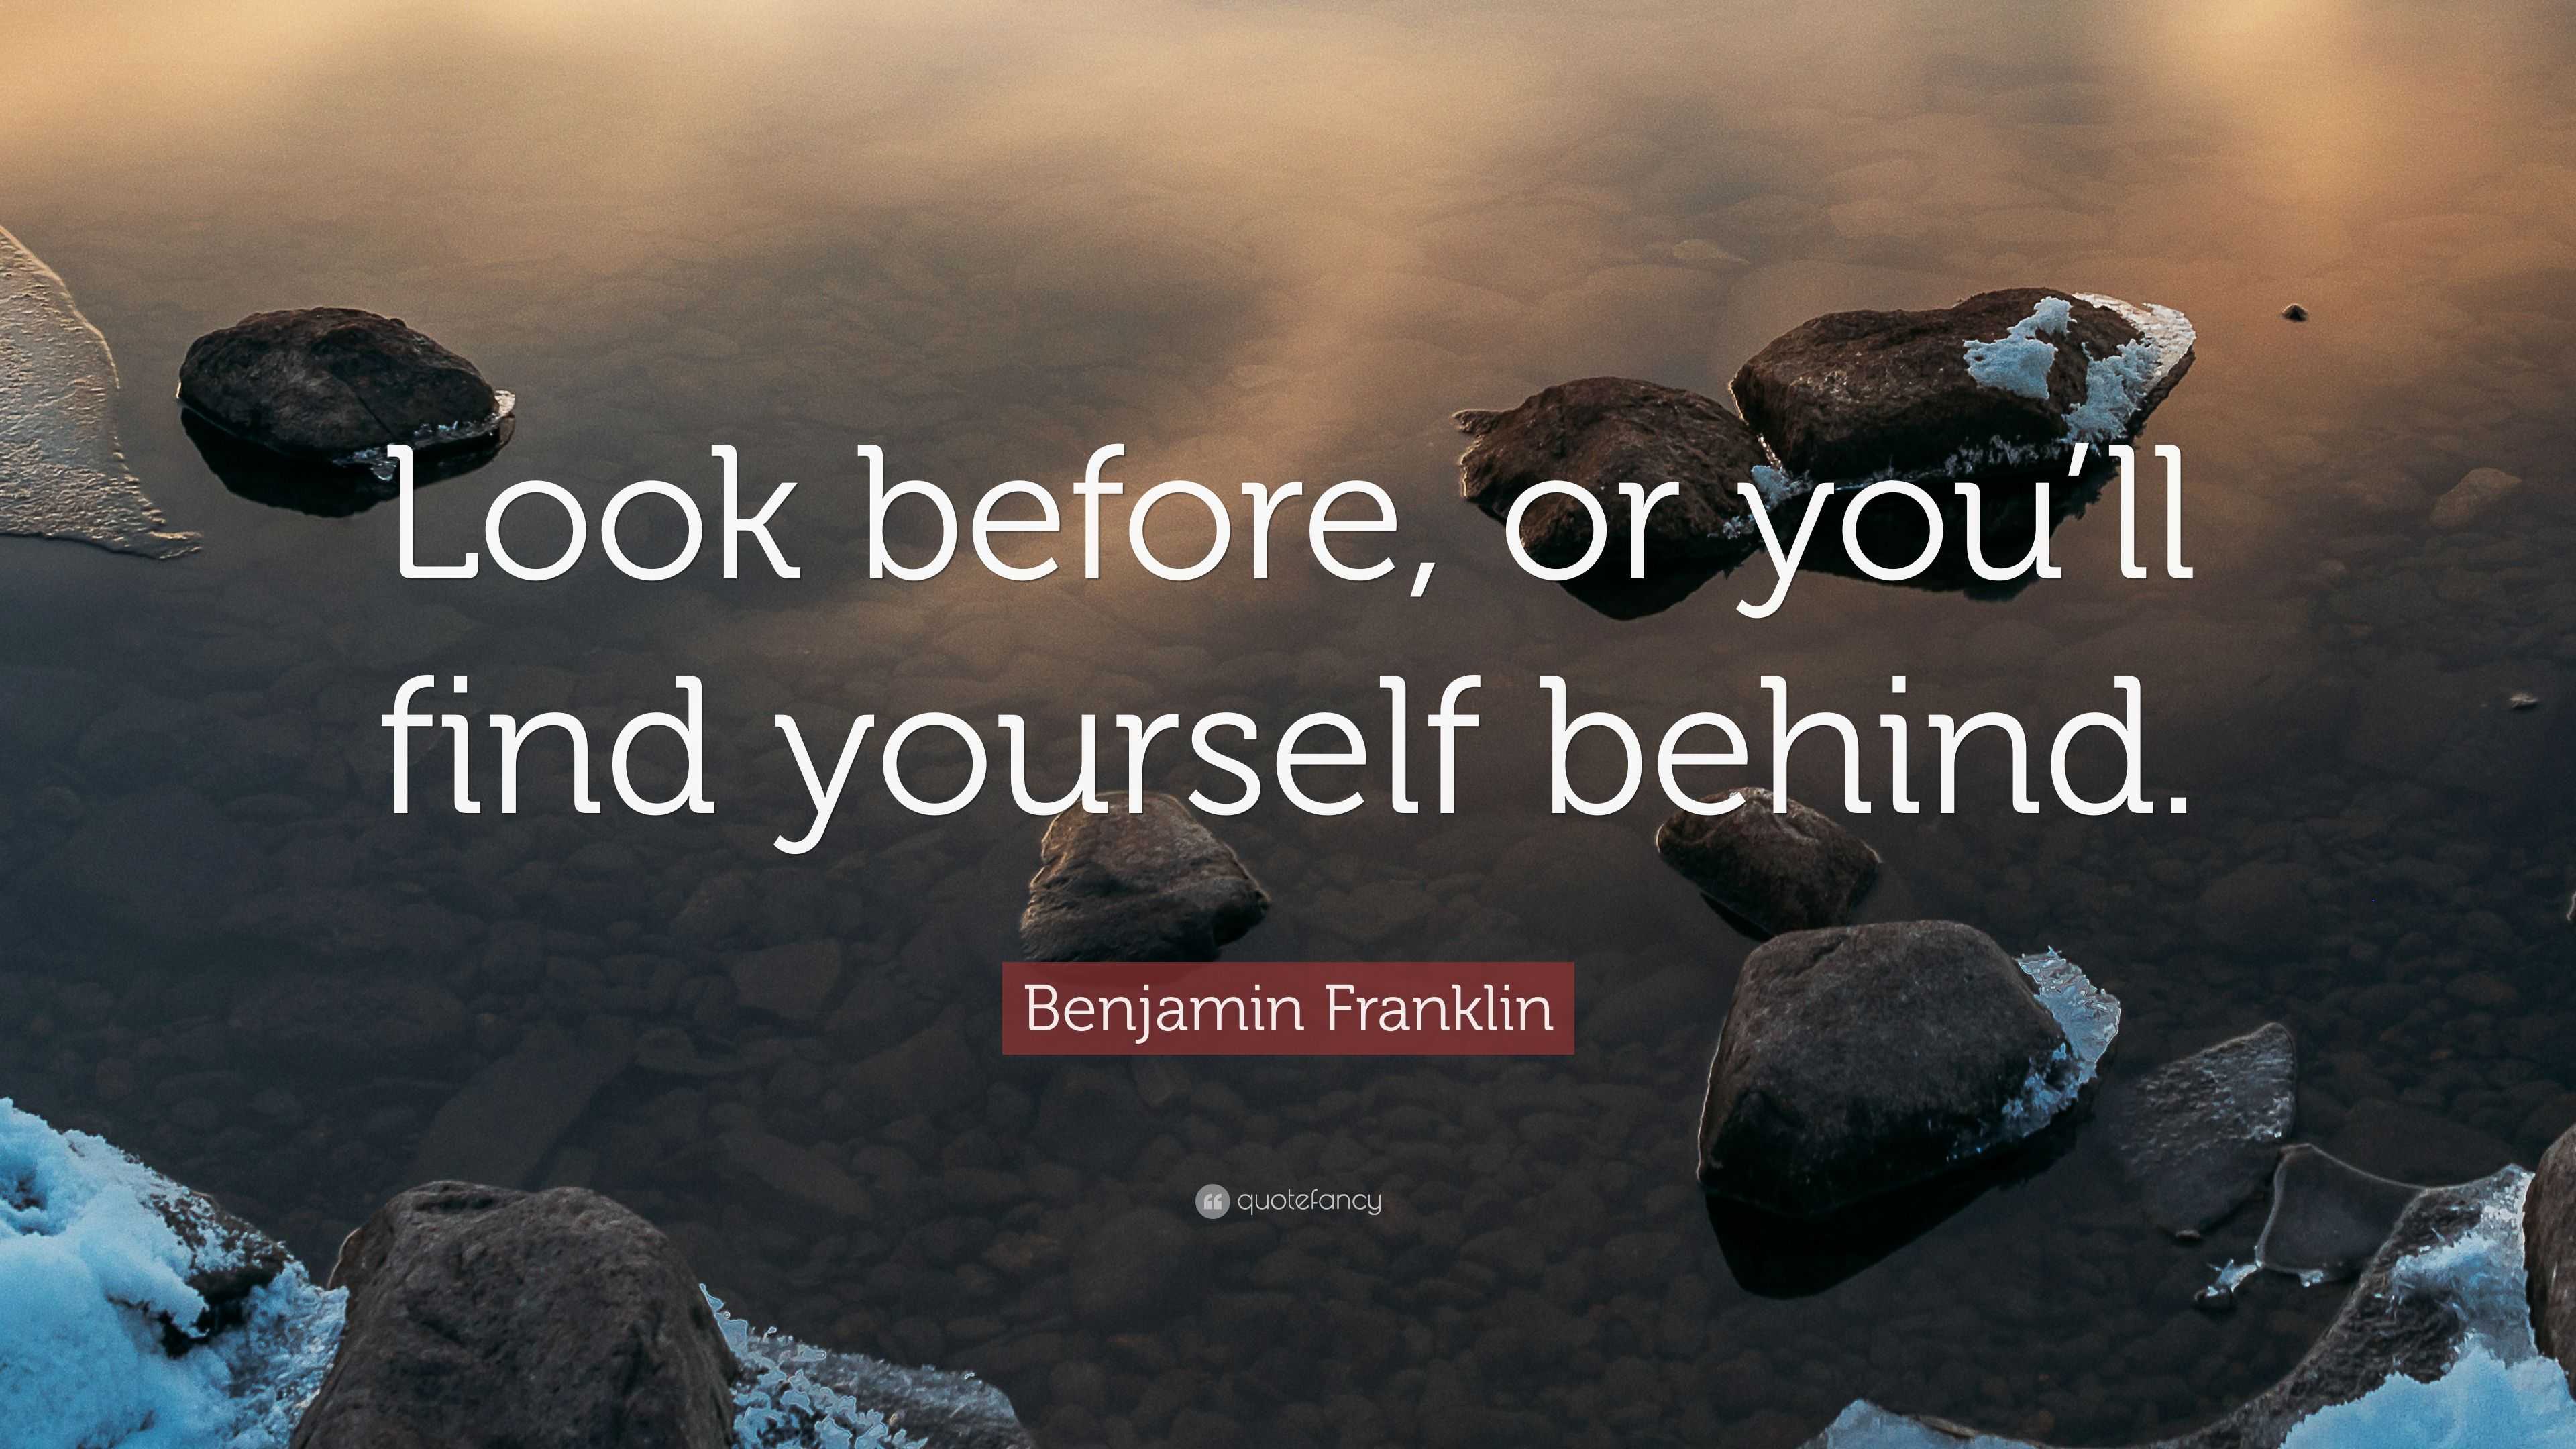 Benjamin Franklin Quote: “Look before, or you’ll find yourself behind.” Look Before Or You'll Find Yourself Behind